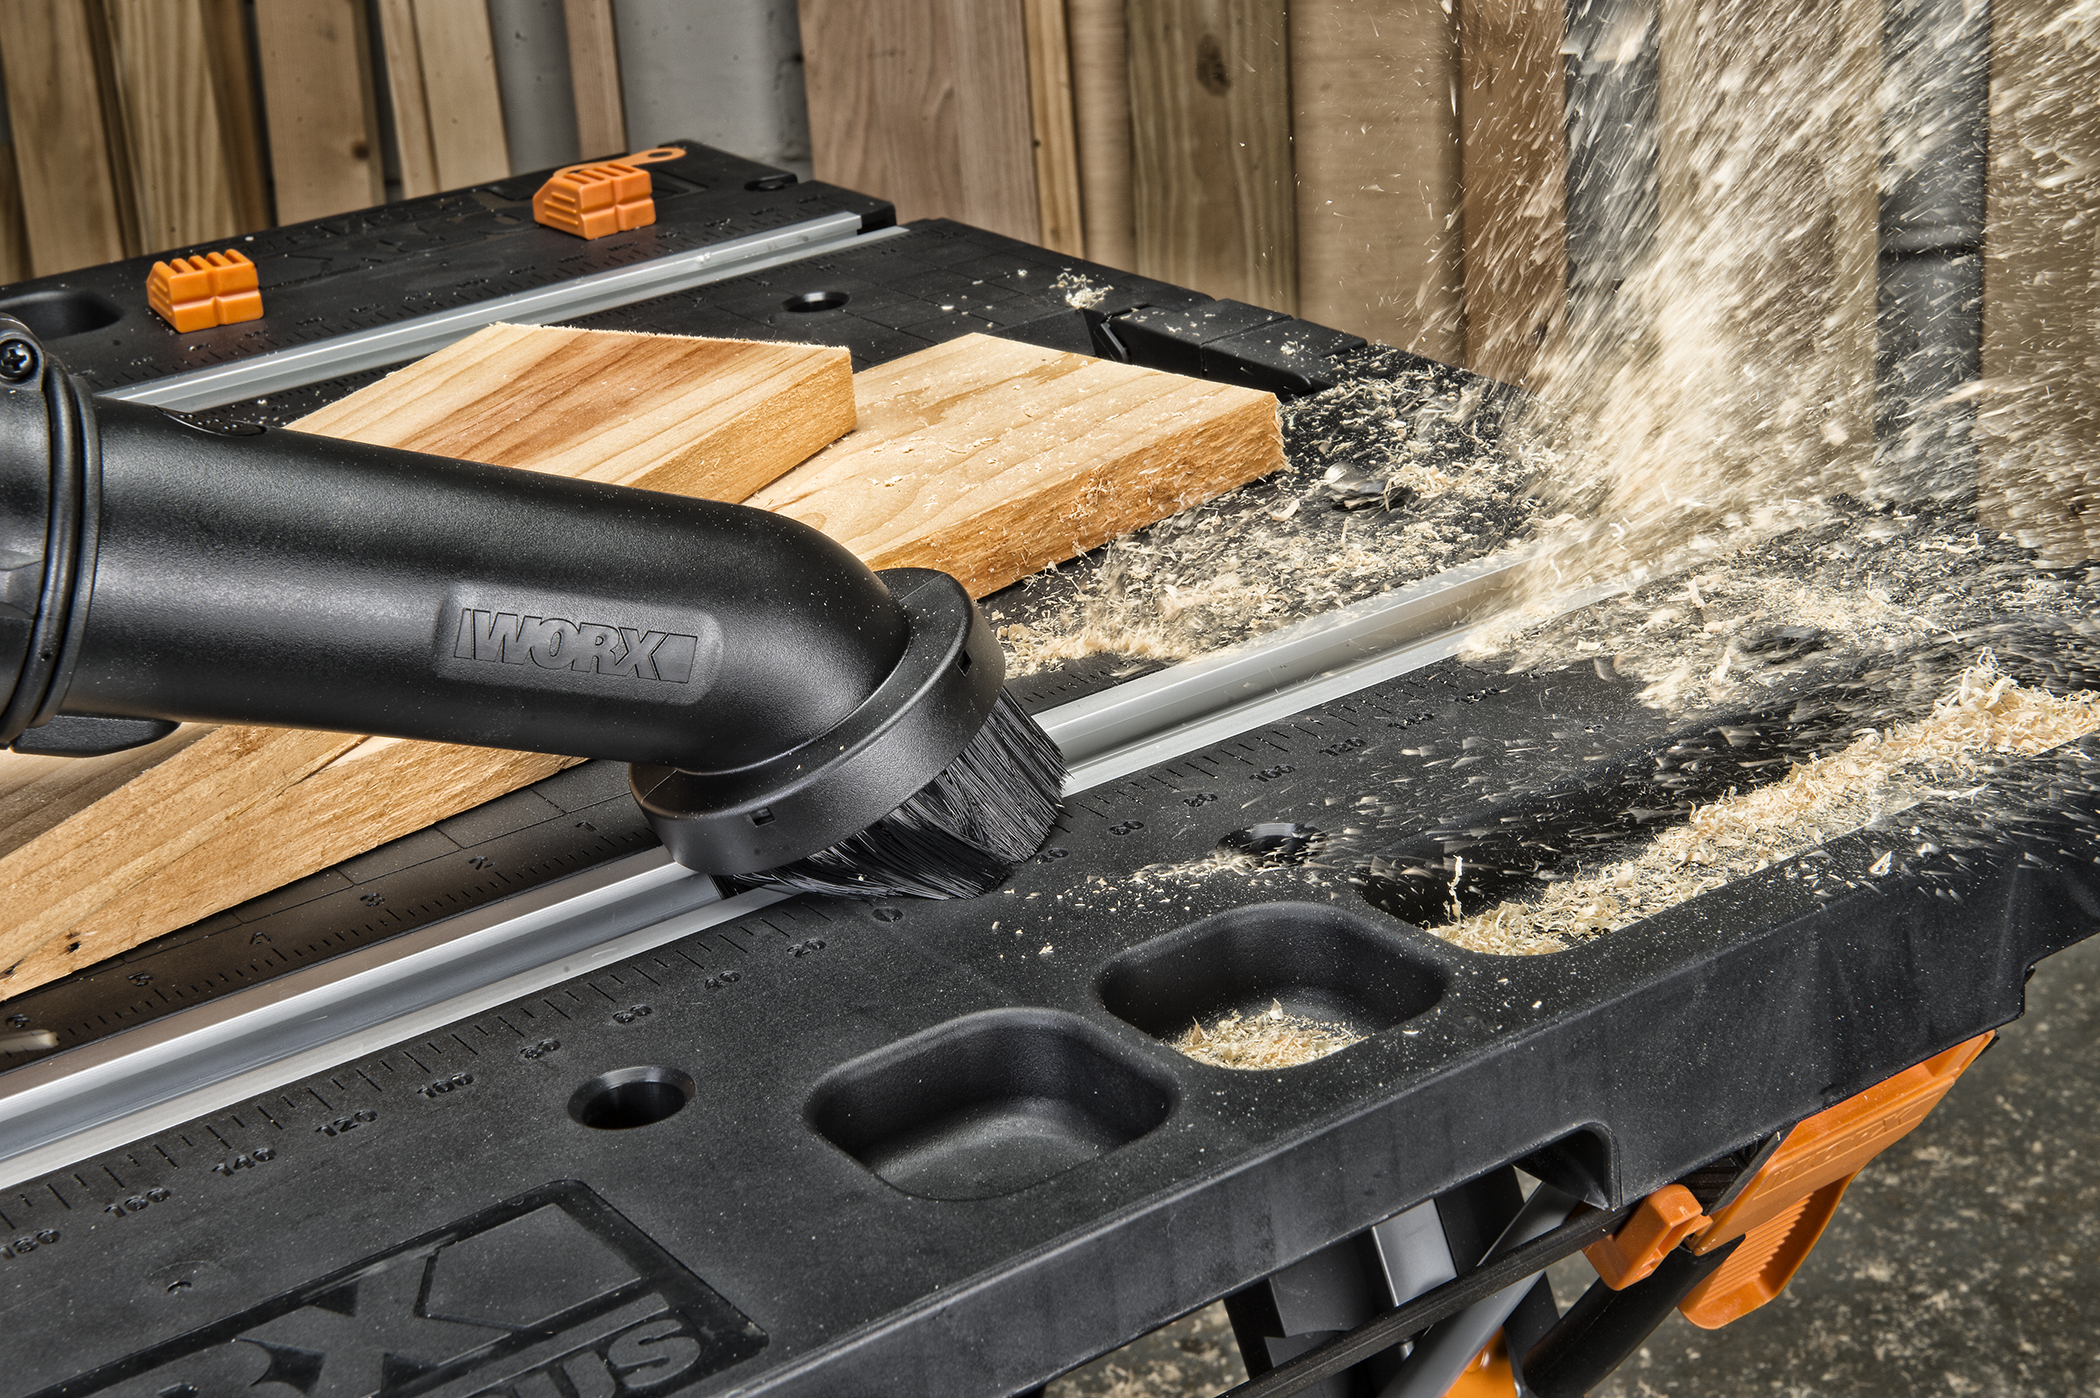 WORX 20V Shop Blower's dust brush accessory quickly removes dust and debris from cracks and crevices.